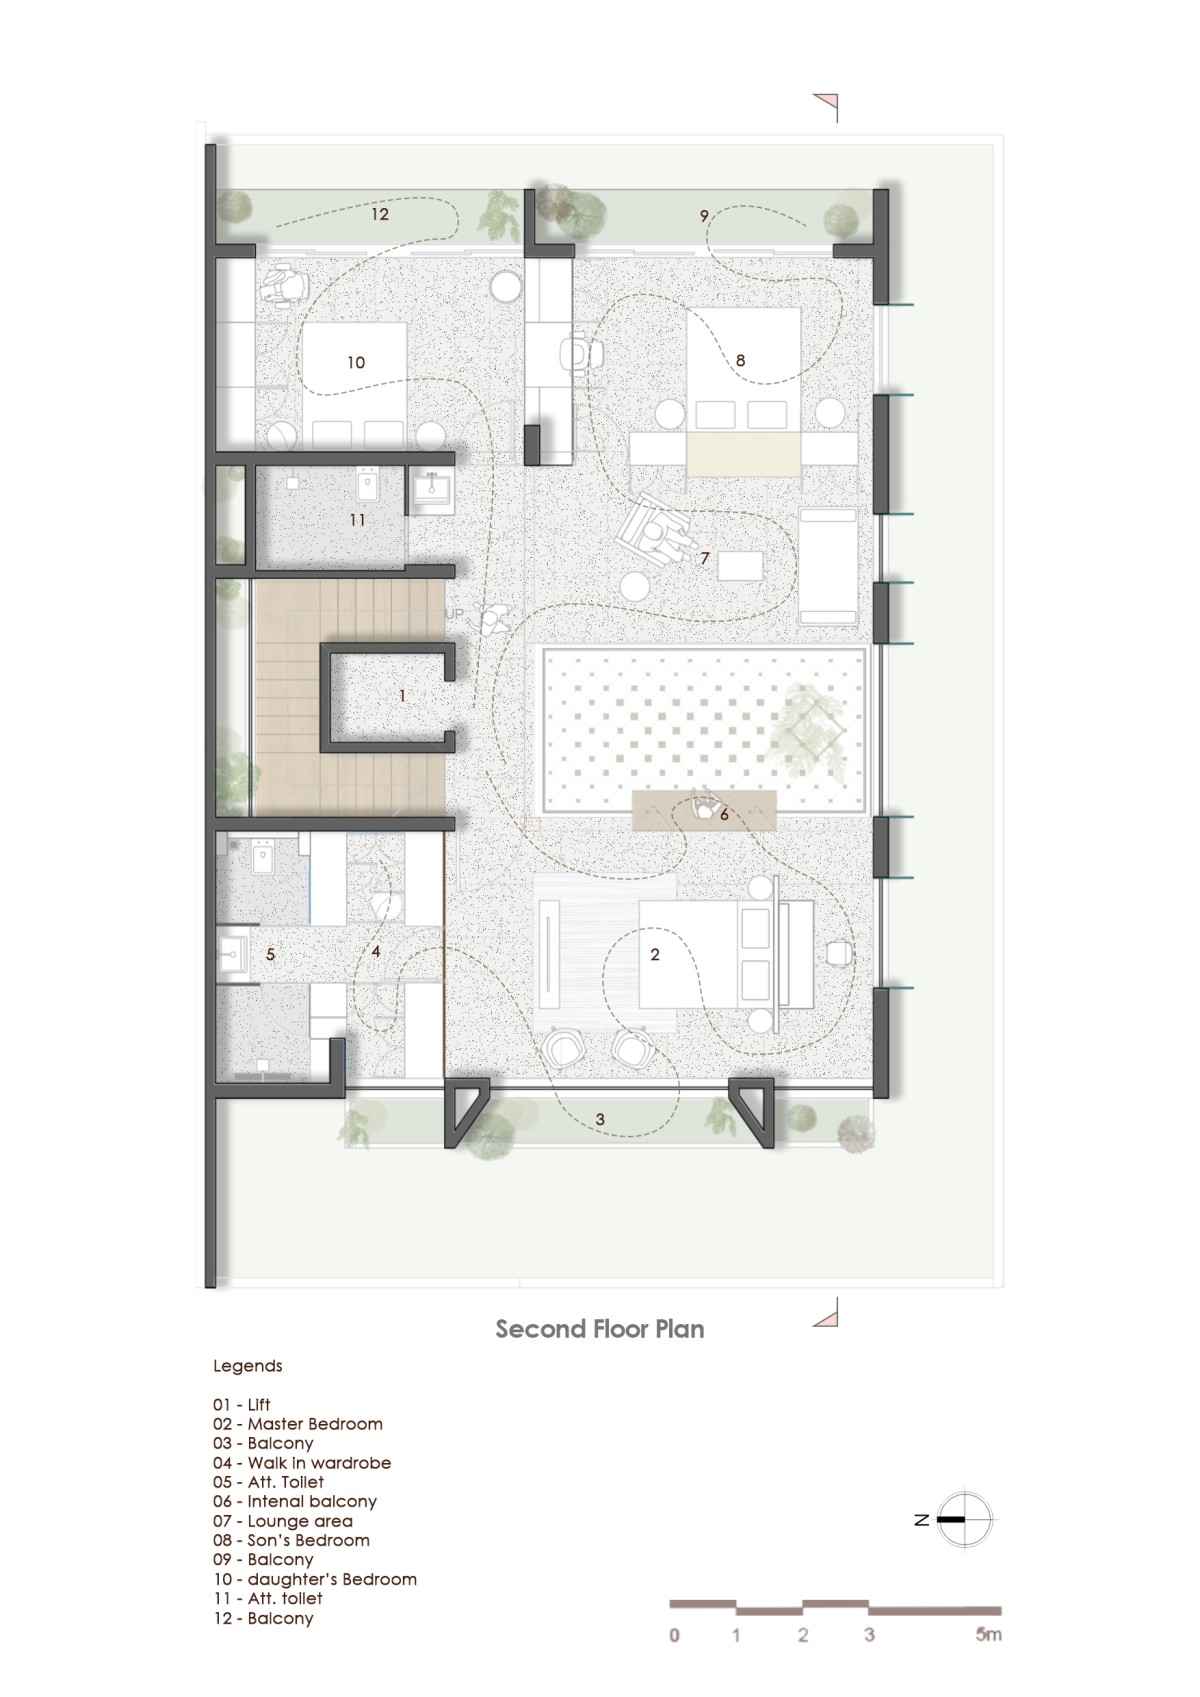 Second floor plan of The House With No Walls by The Design Alley